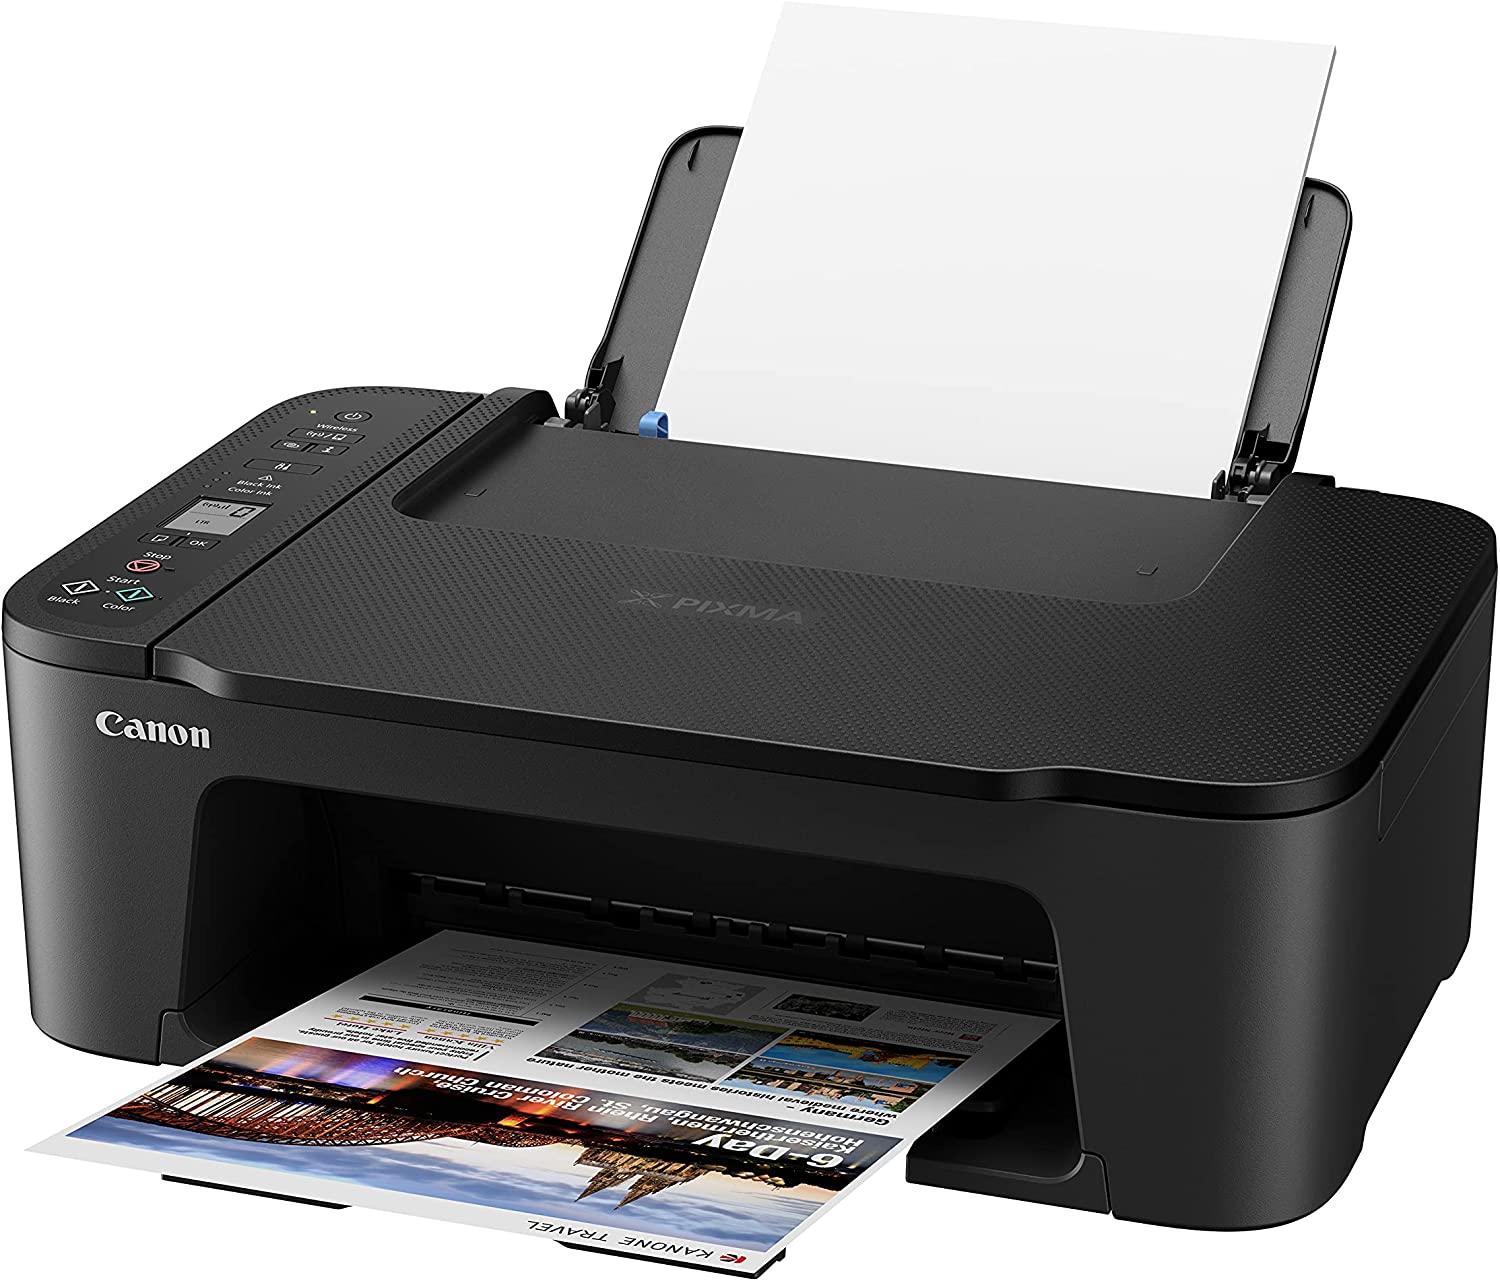 Review of Canon PIXMA TS3520 Compact Wireless All-in-One Printer, Black